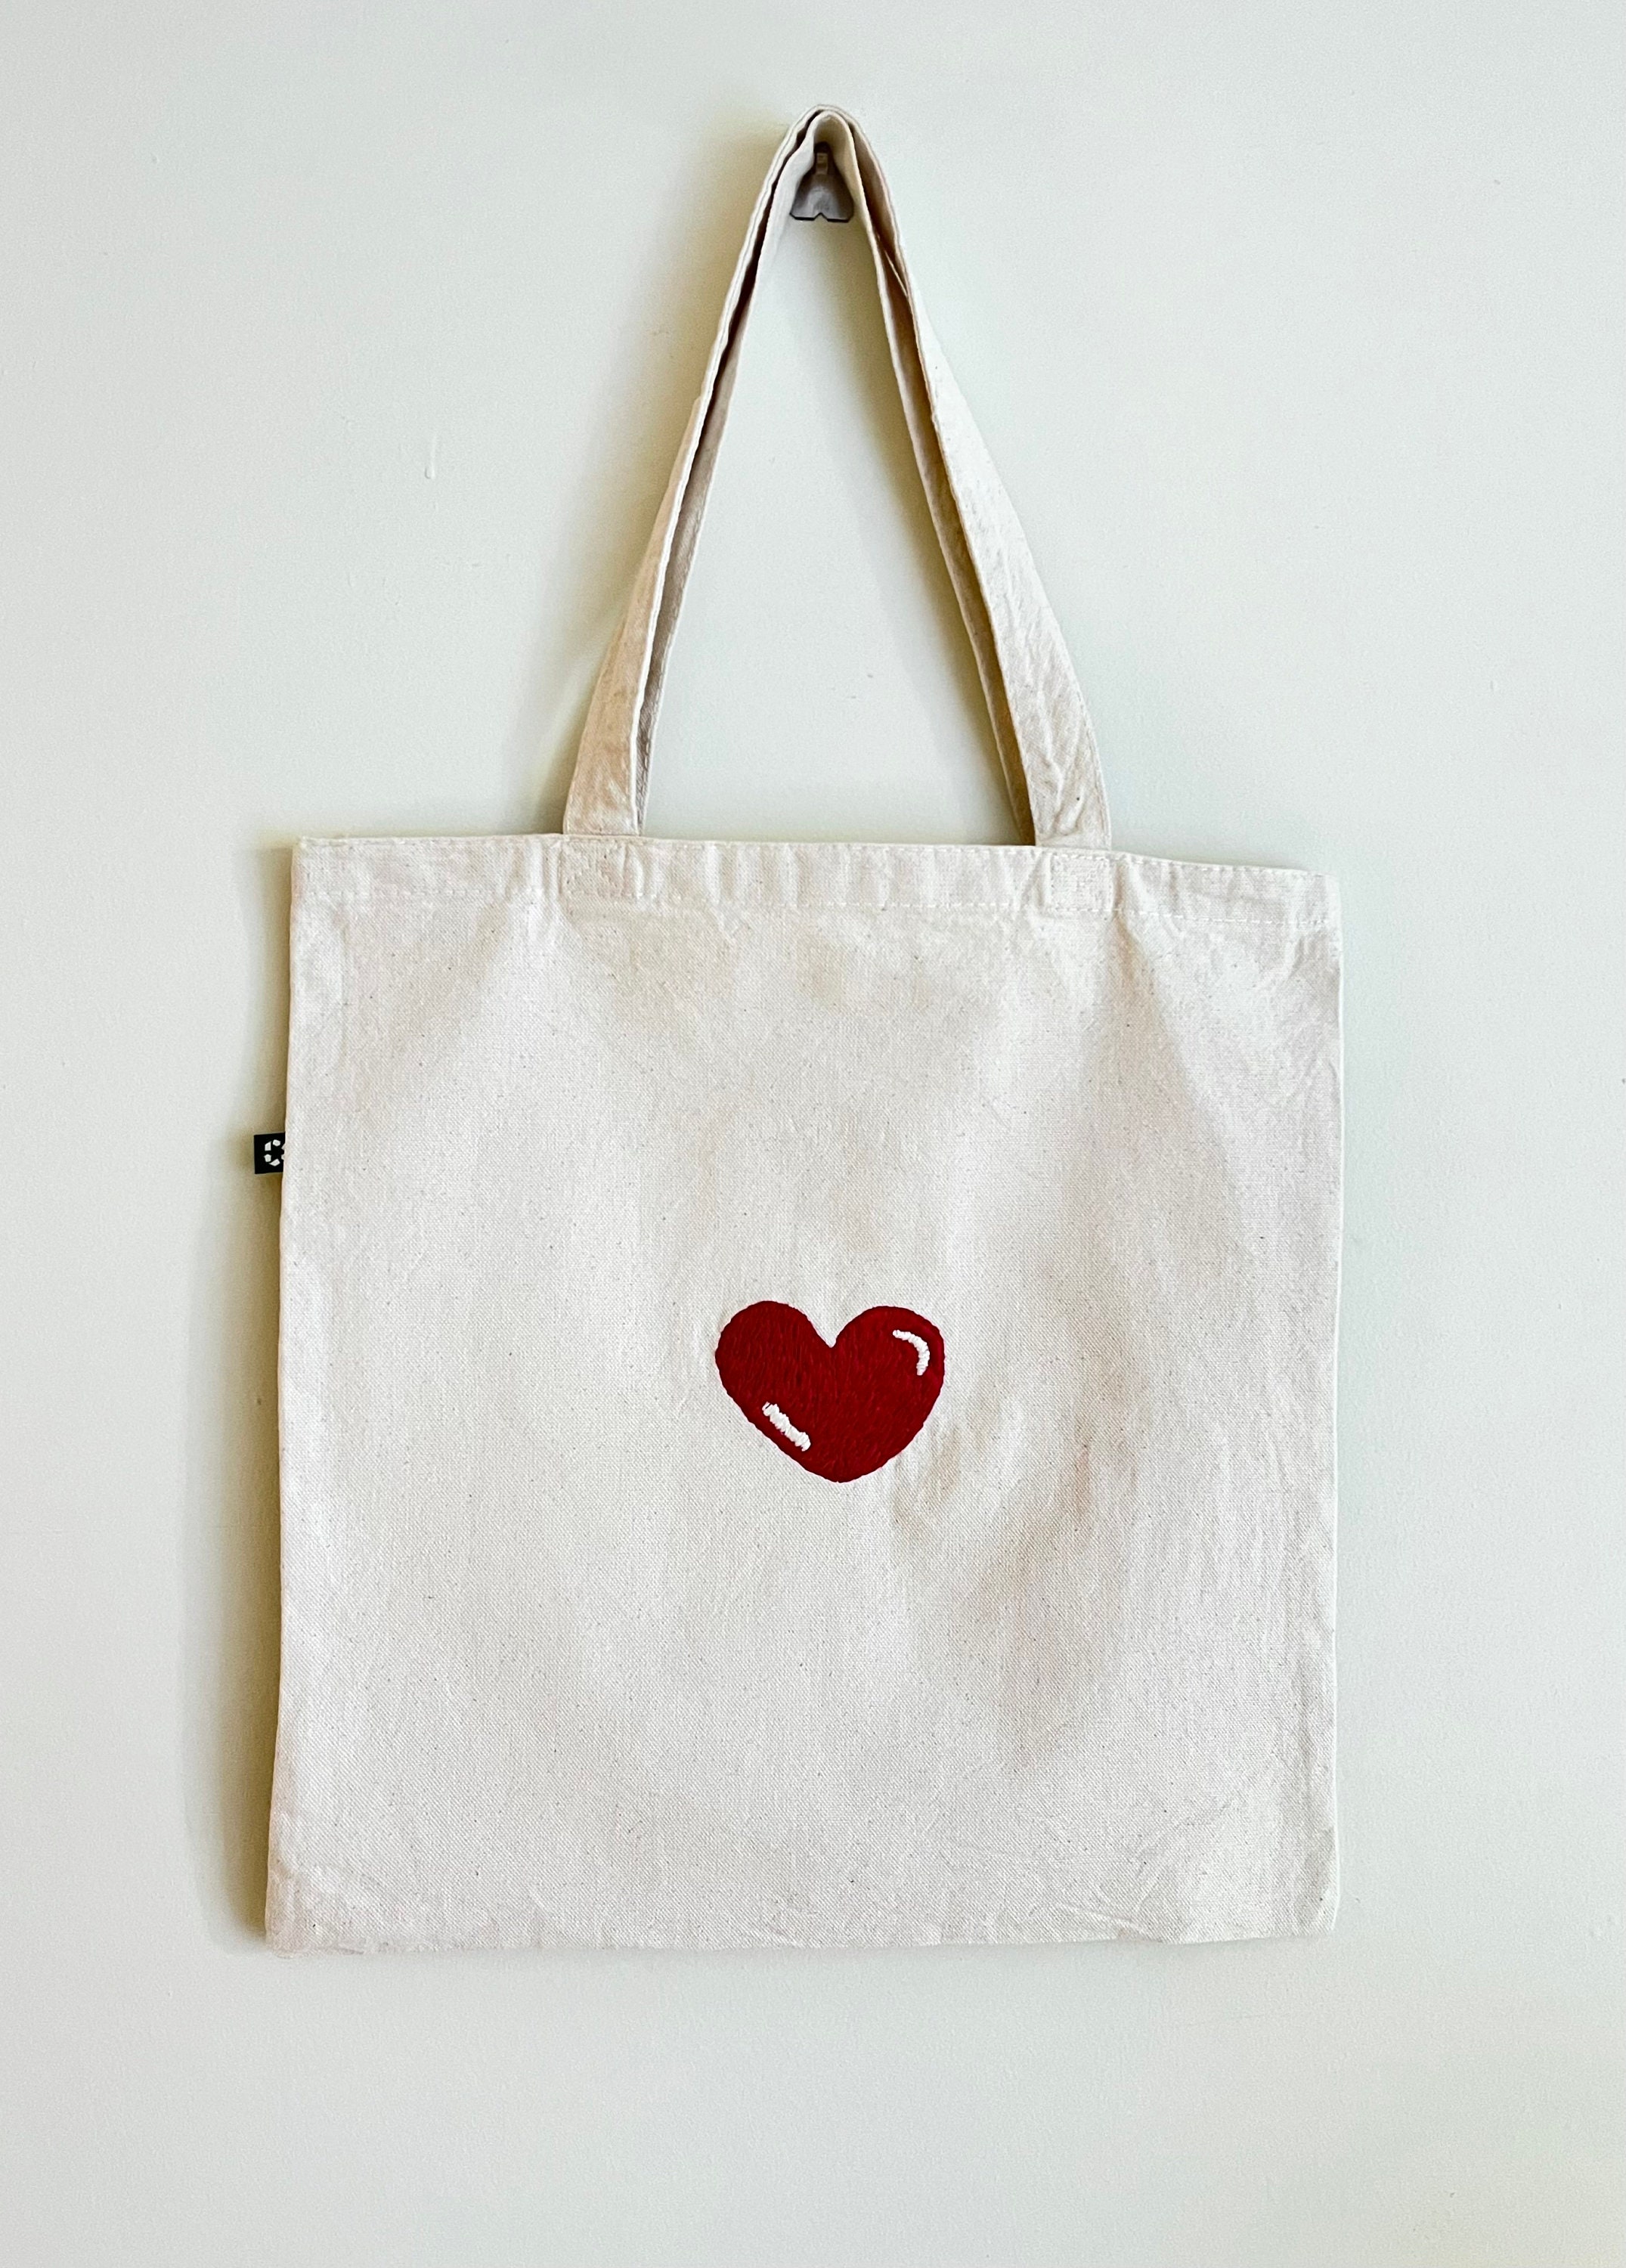 1pc Heart-shaped Pattern Fashionable Tote Bag With Zipper Closure, Suitable  For Women's Daily Use